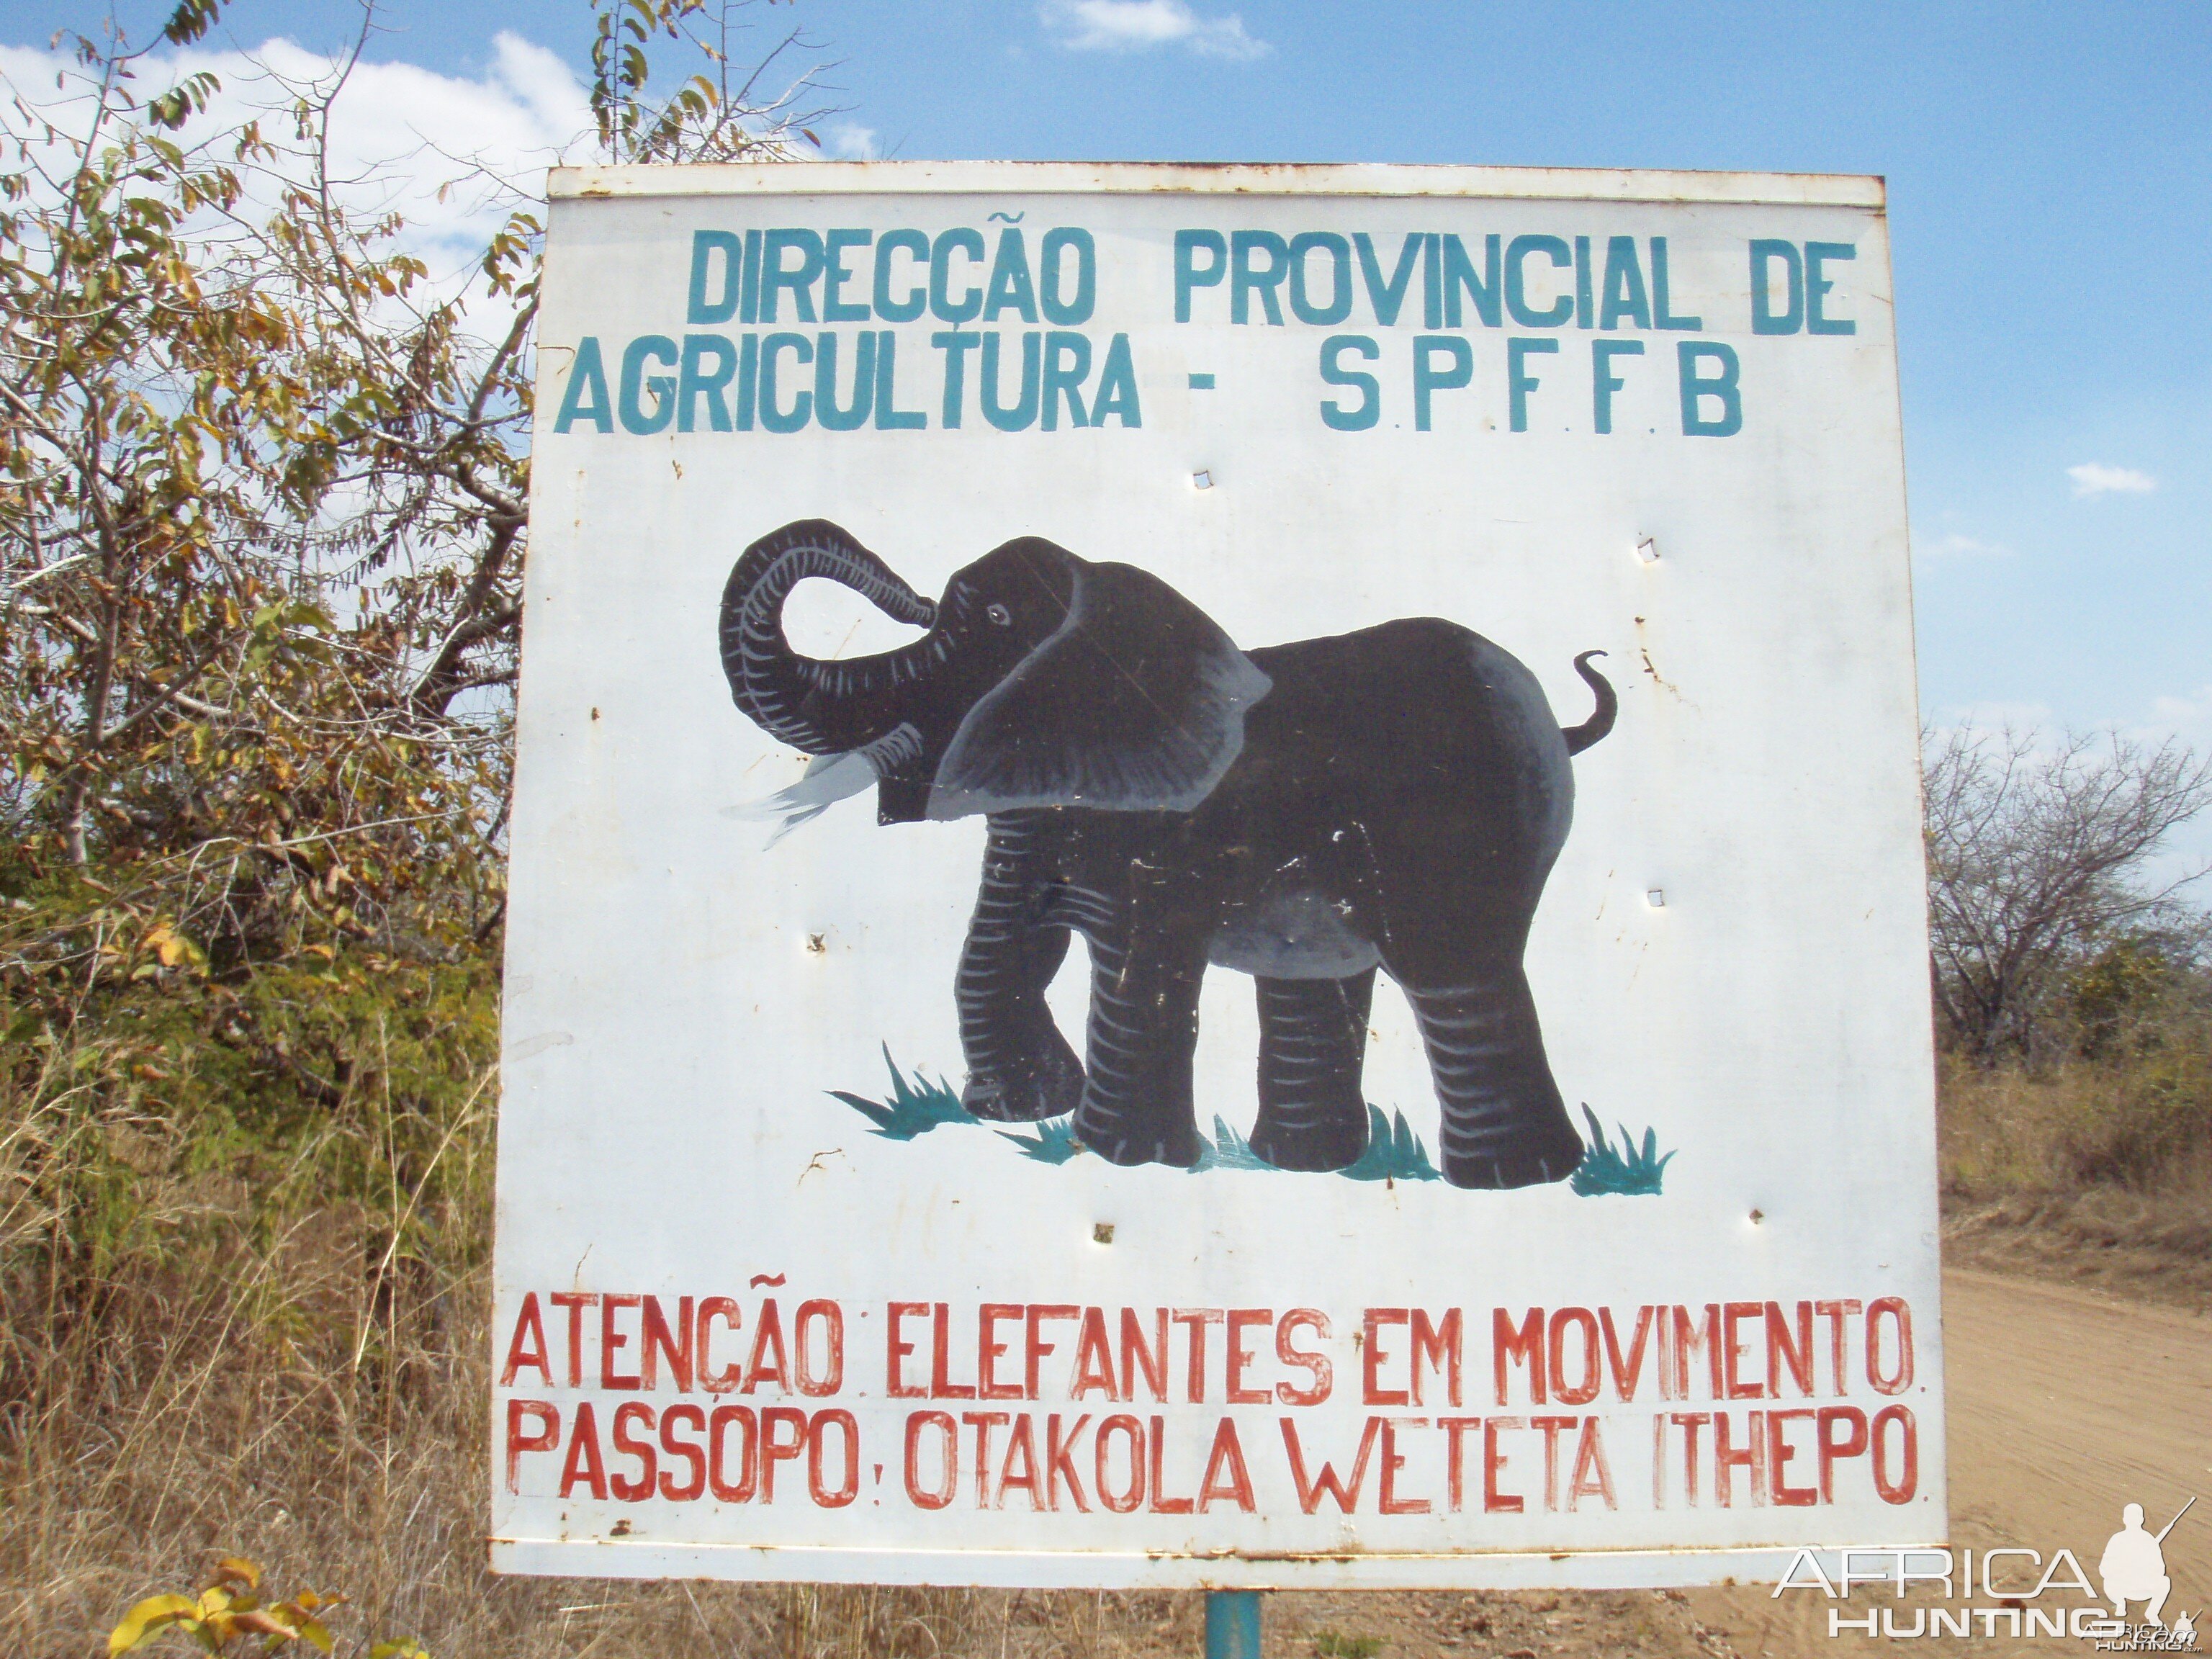 Road sign in northern Mozambique